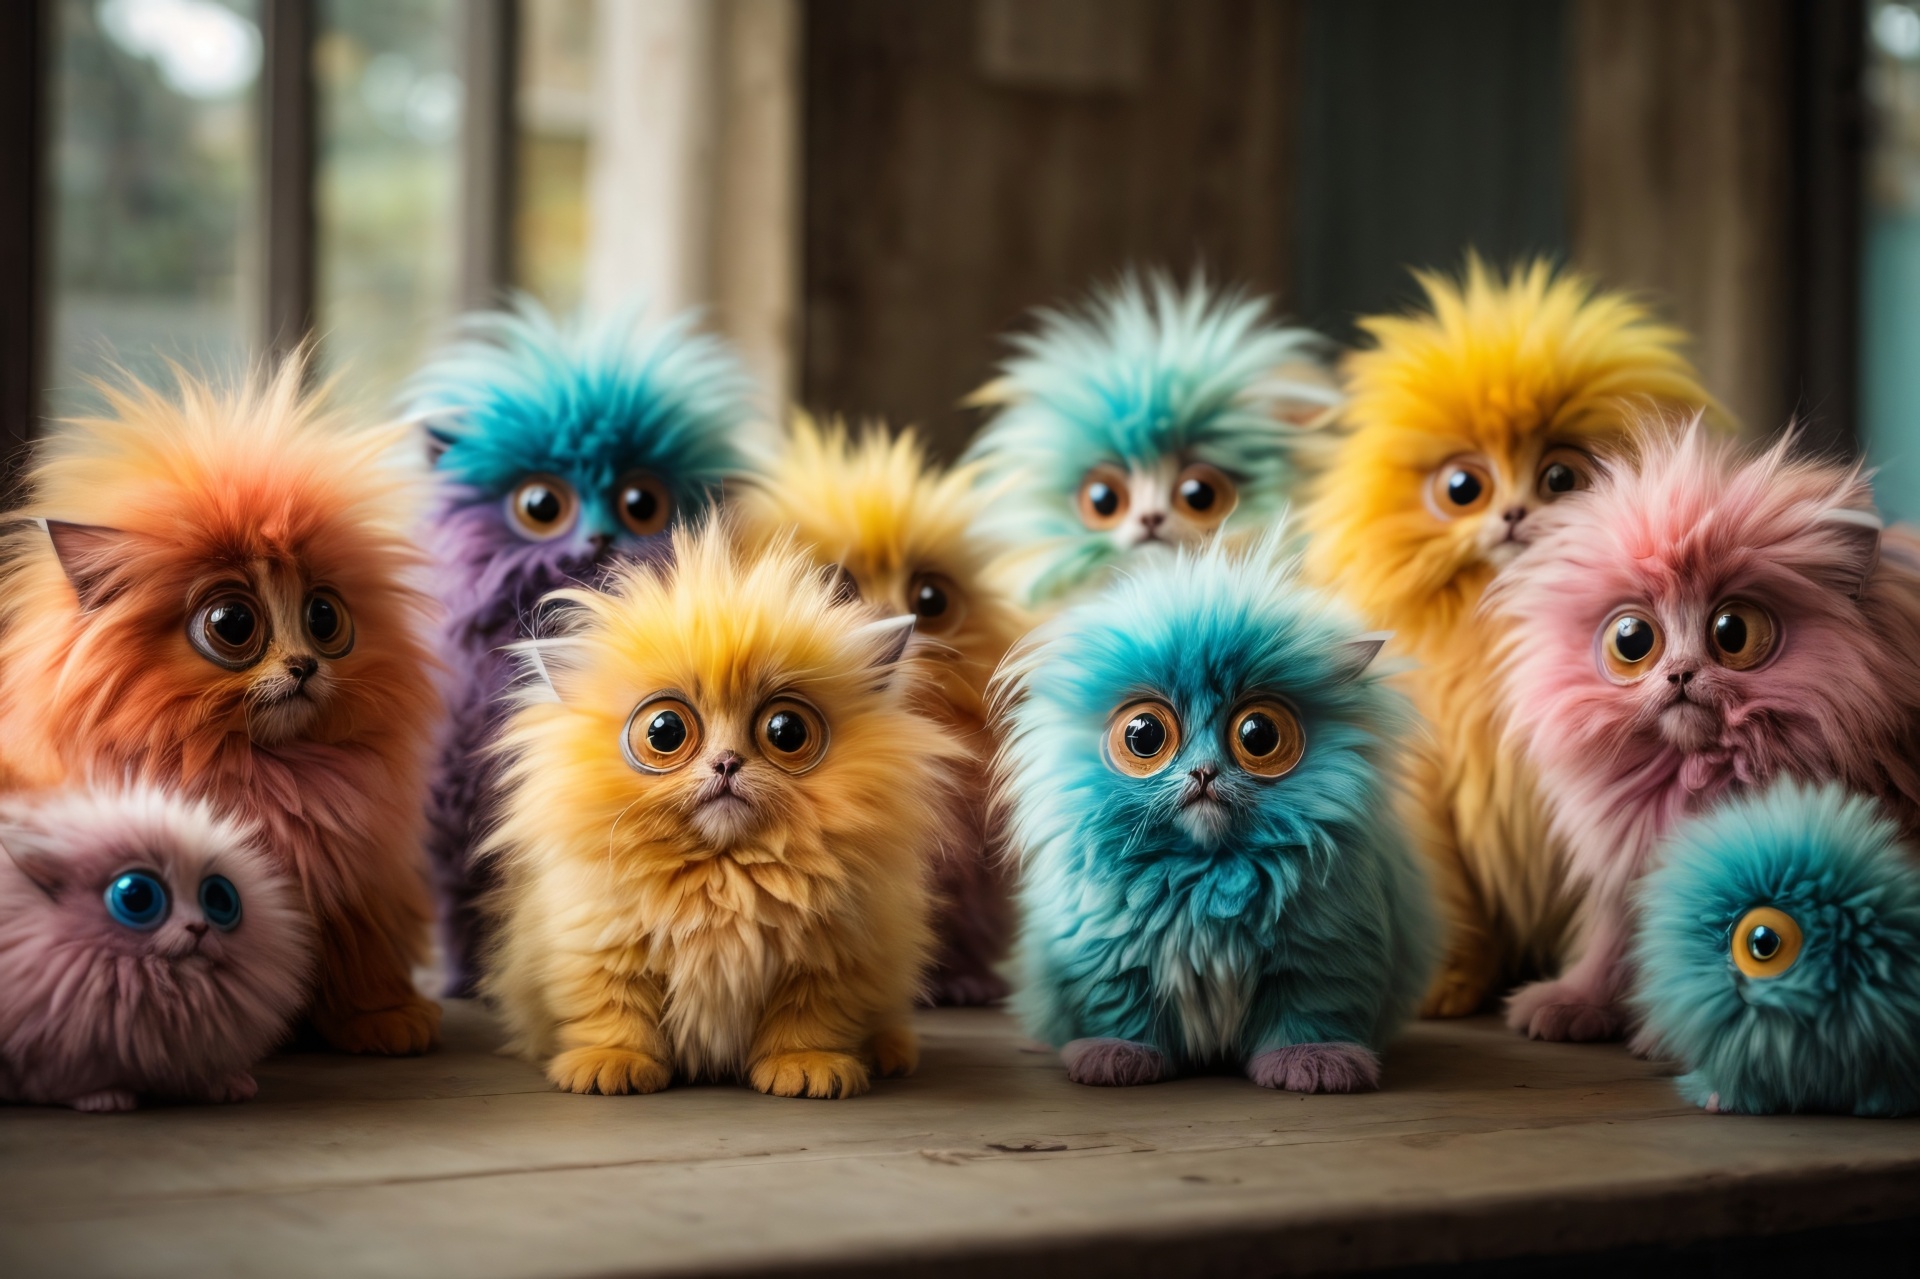 Cute Fluffy Multi-colored Monsters